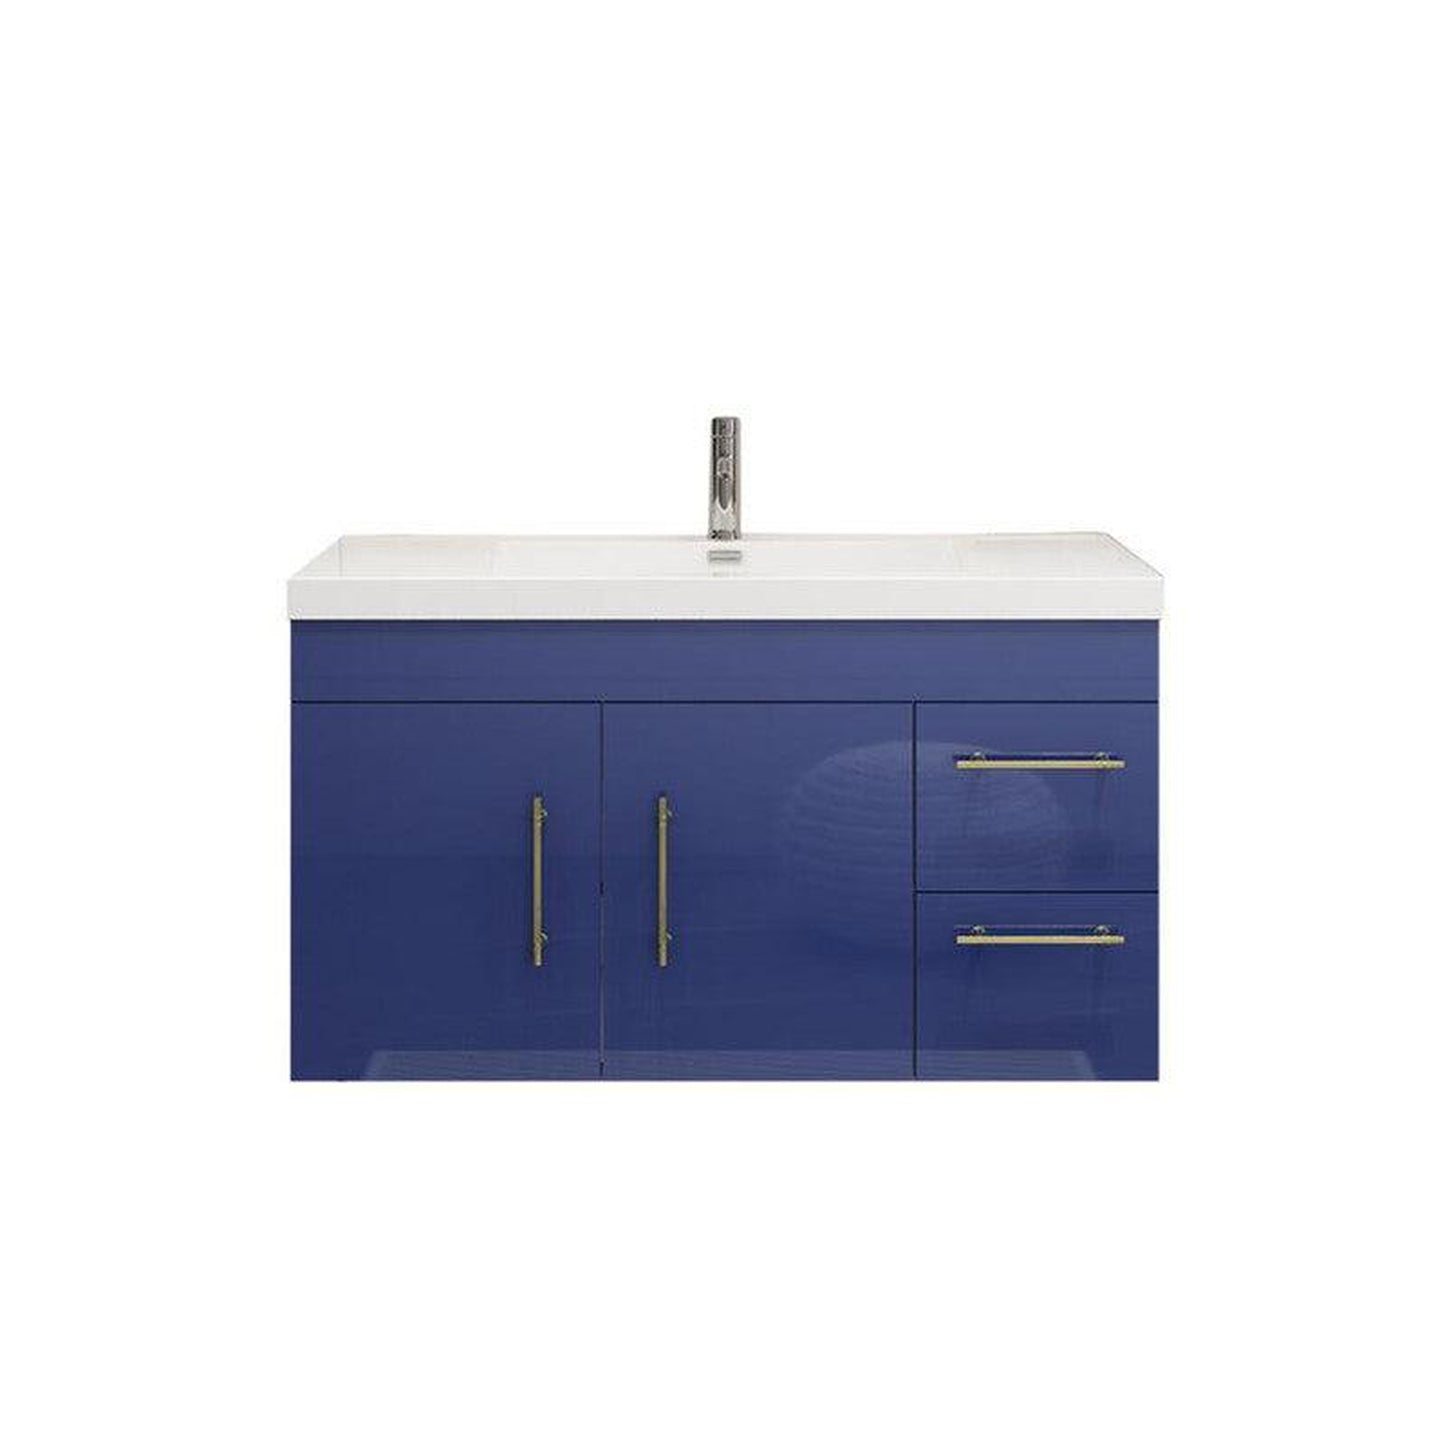 Moreno Bath ELSA 42" High Gloss Night Blue Wall-Mounted Vanity With Right Side Drawers and Single Reinforced White Acrylic Sink